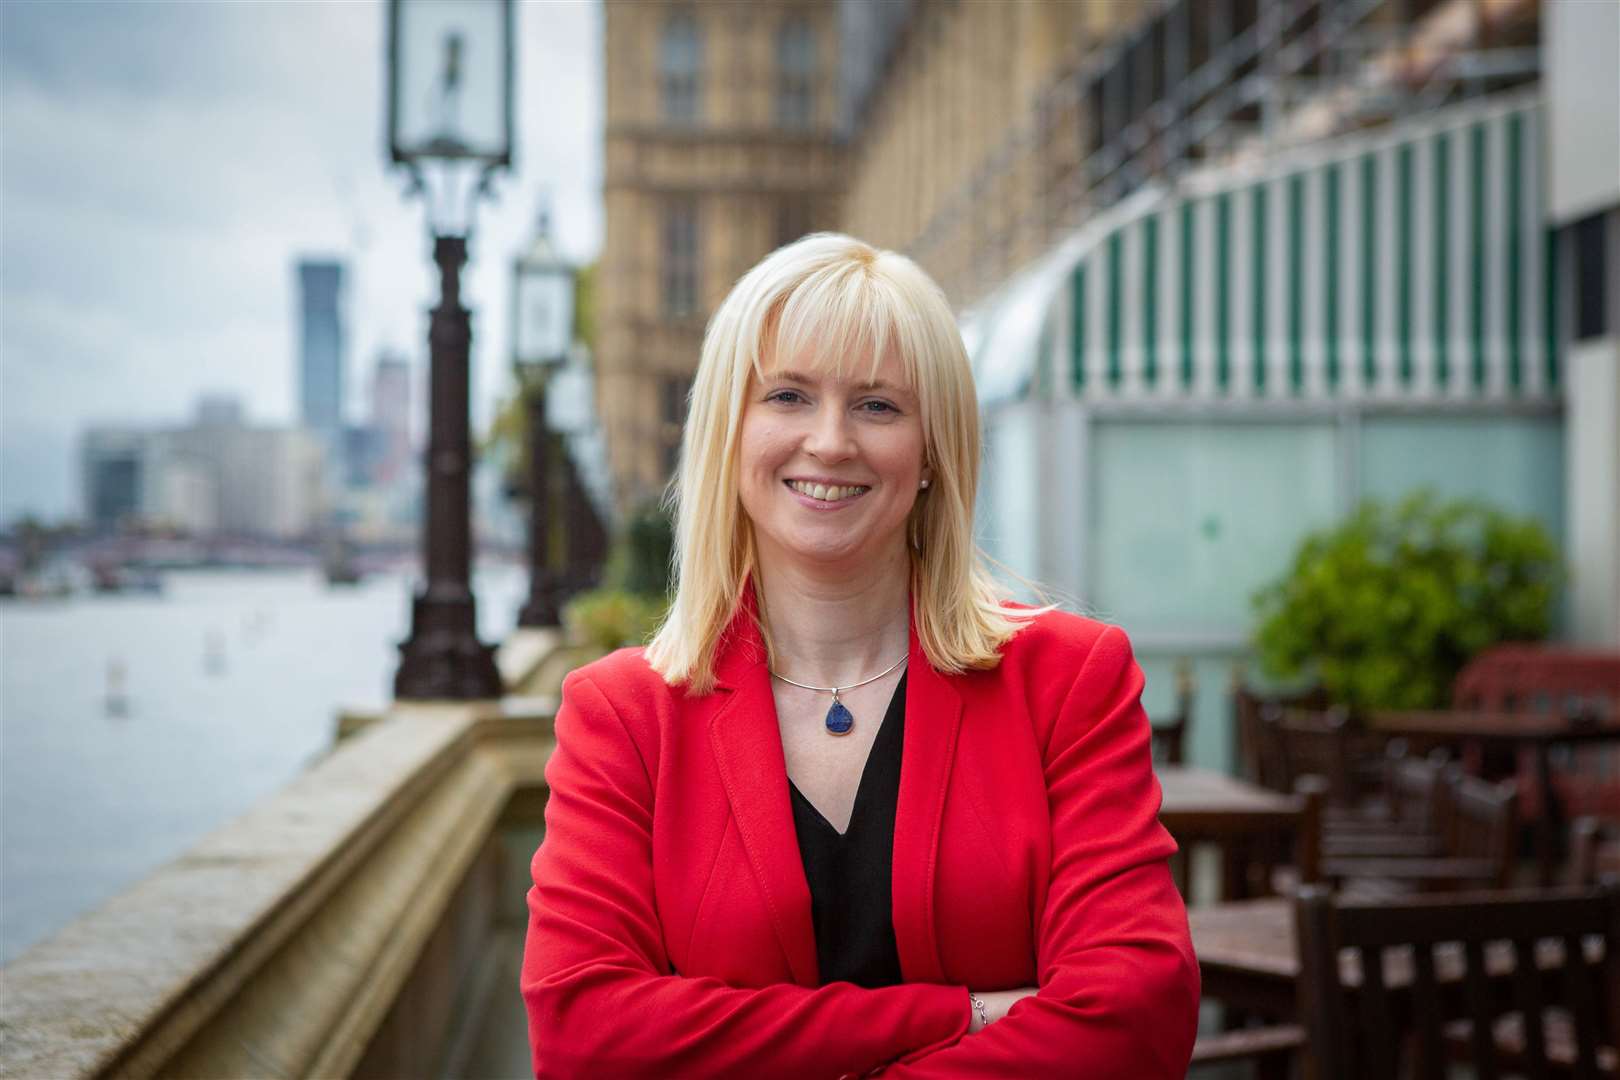 Labour's Rosie Duffield is on course to narrowly hold on in Canterbury